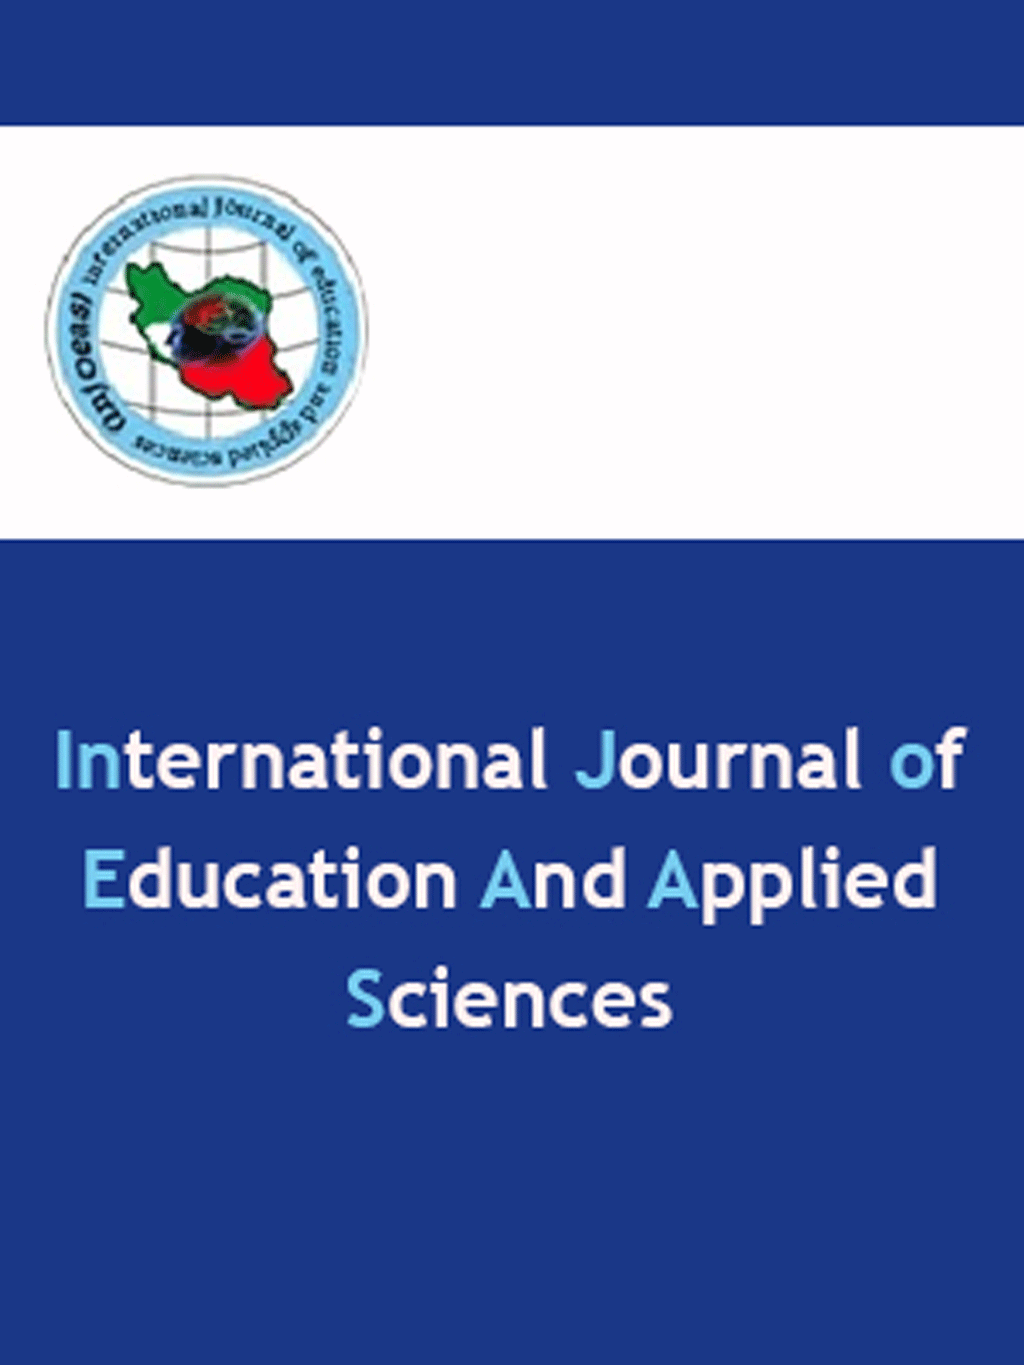 Education and Applied Sciences - April 2020, Volume 1 - Number 1